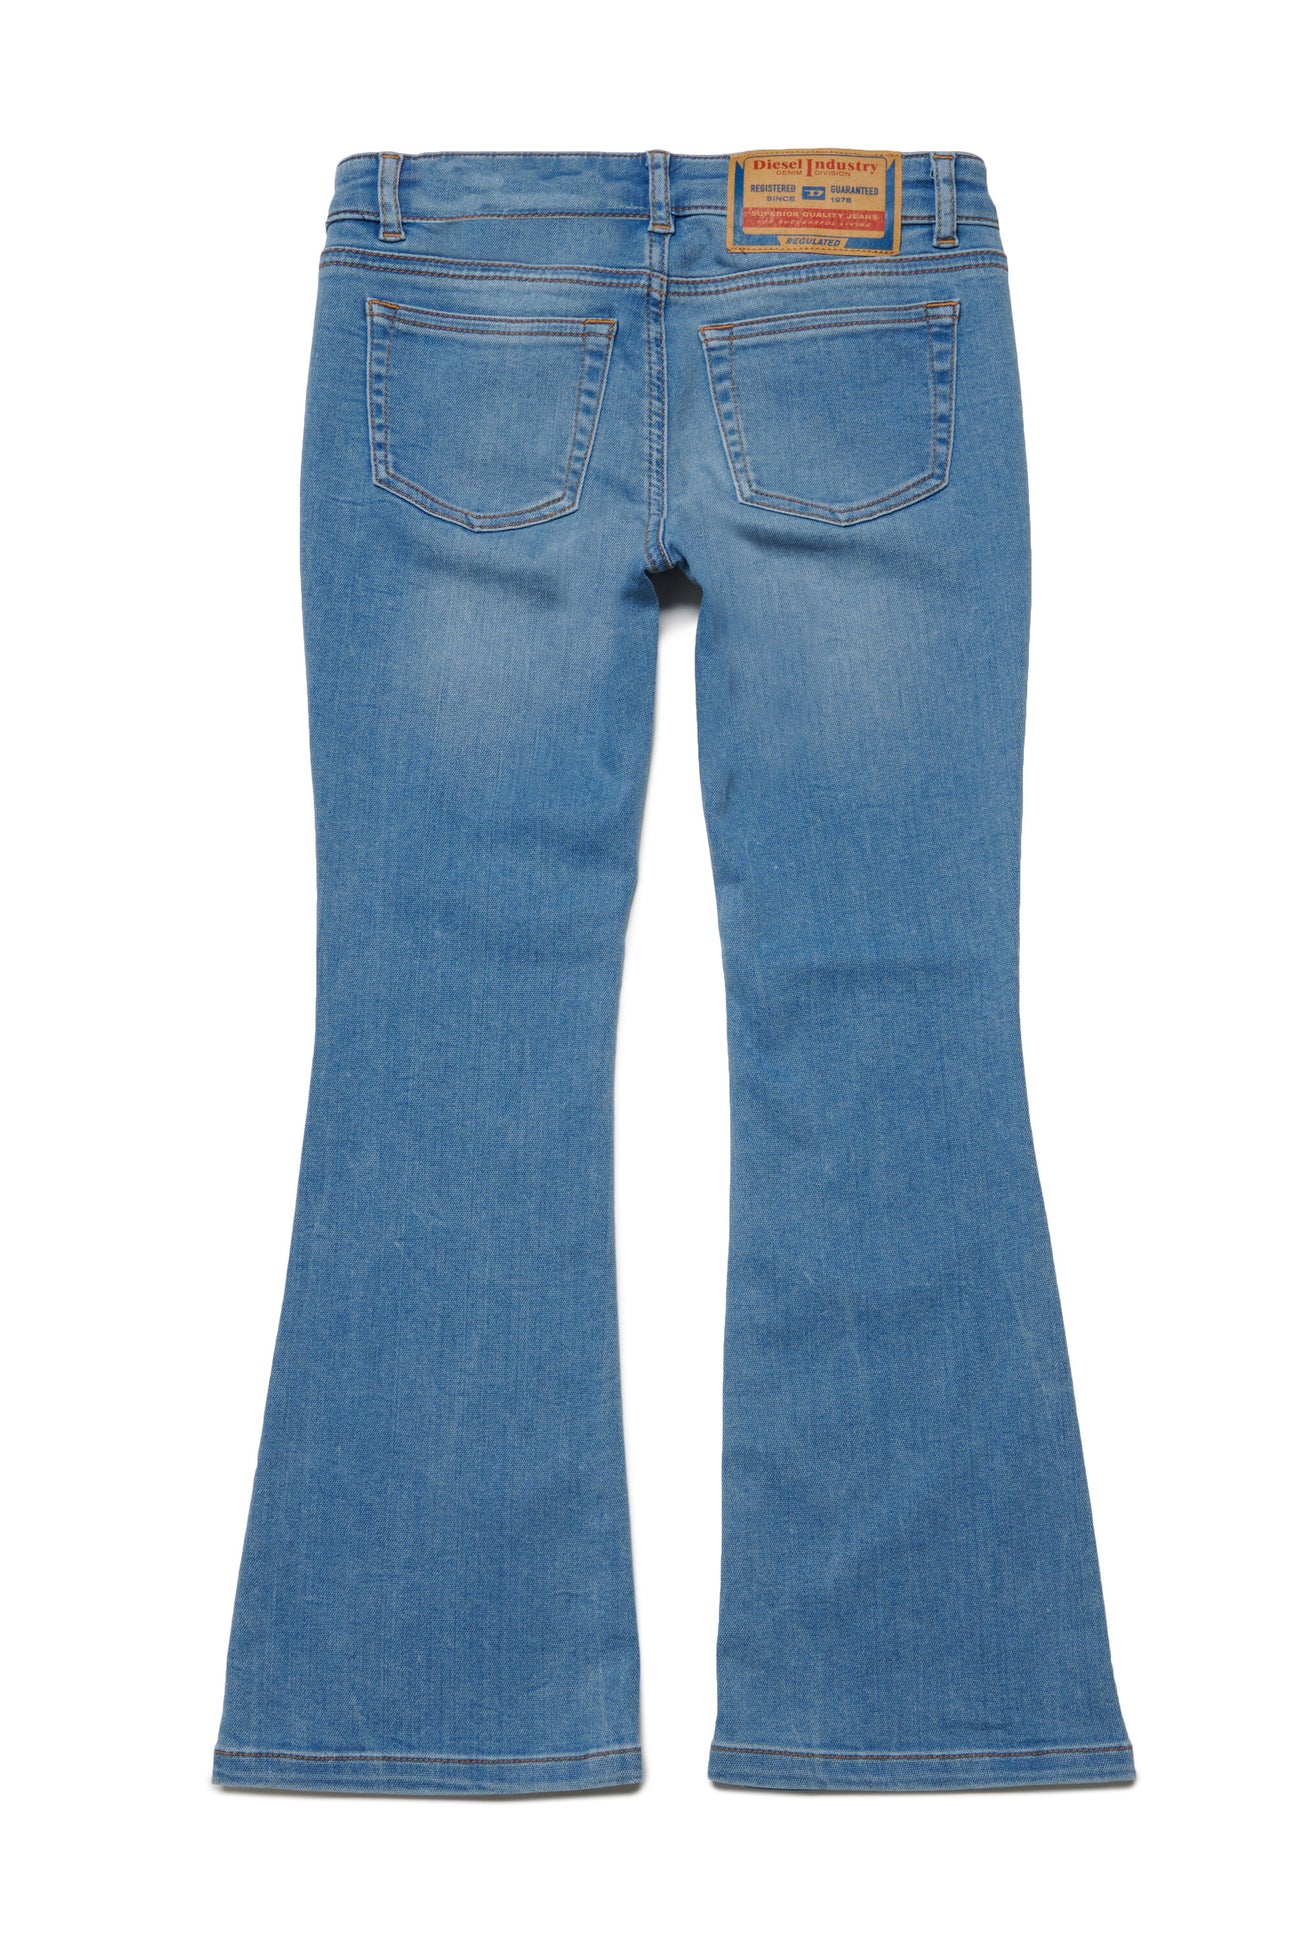 Top 215+ sky blue jeans for girls best